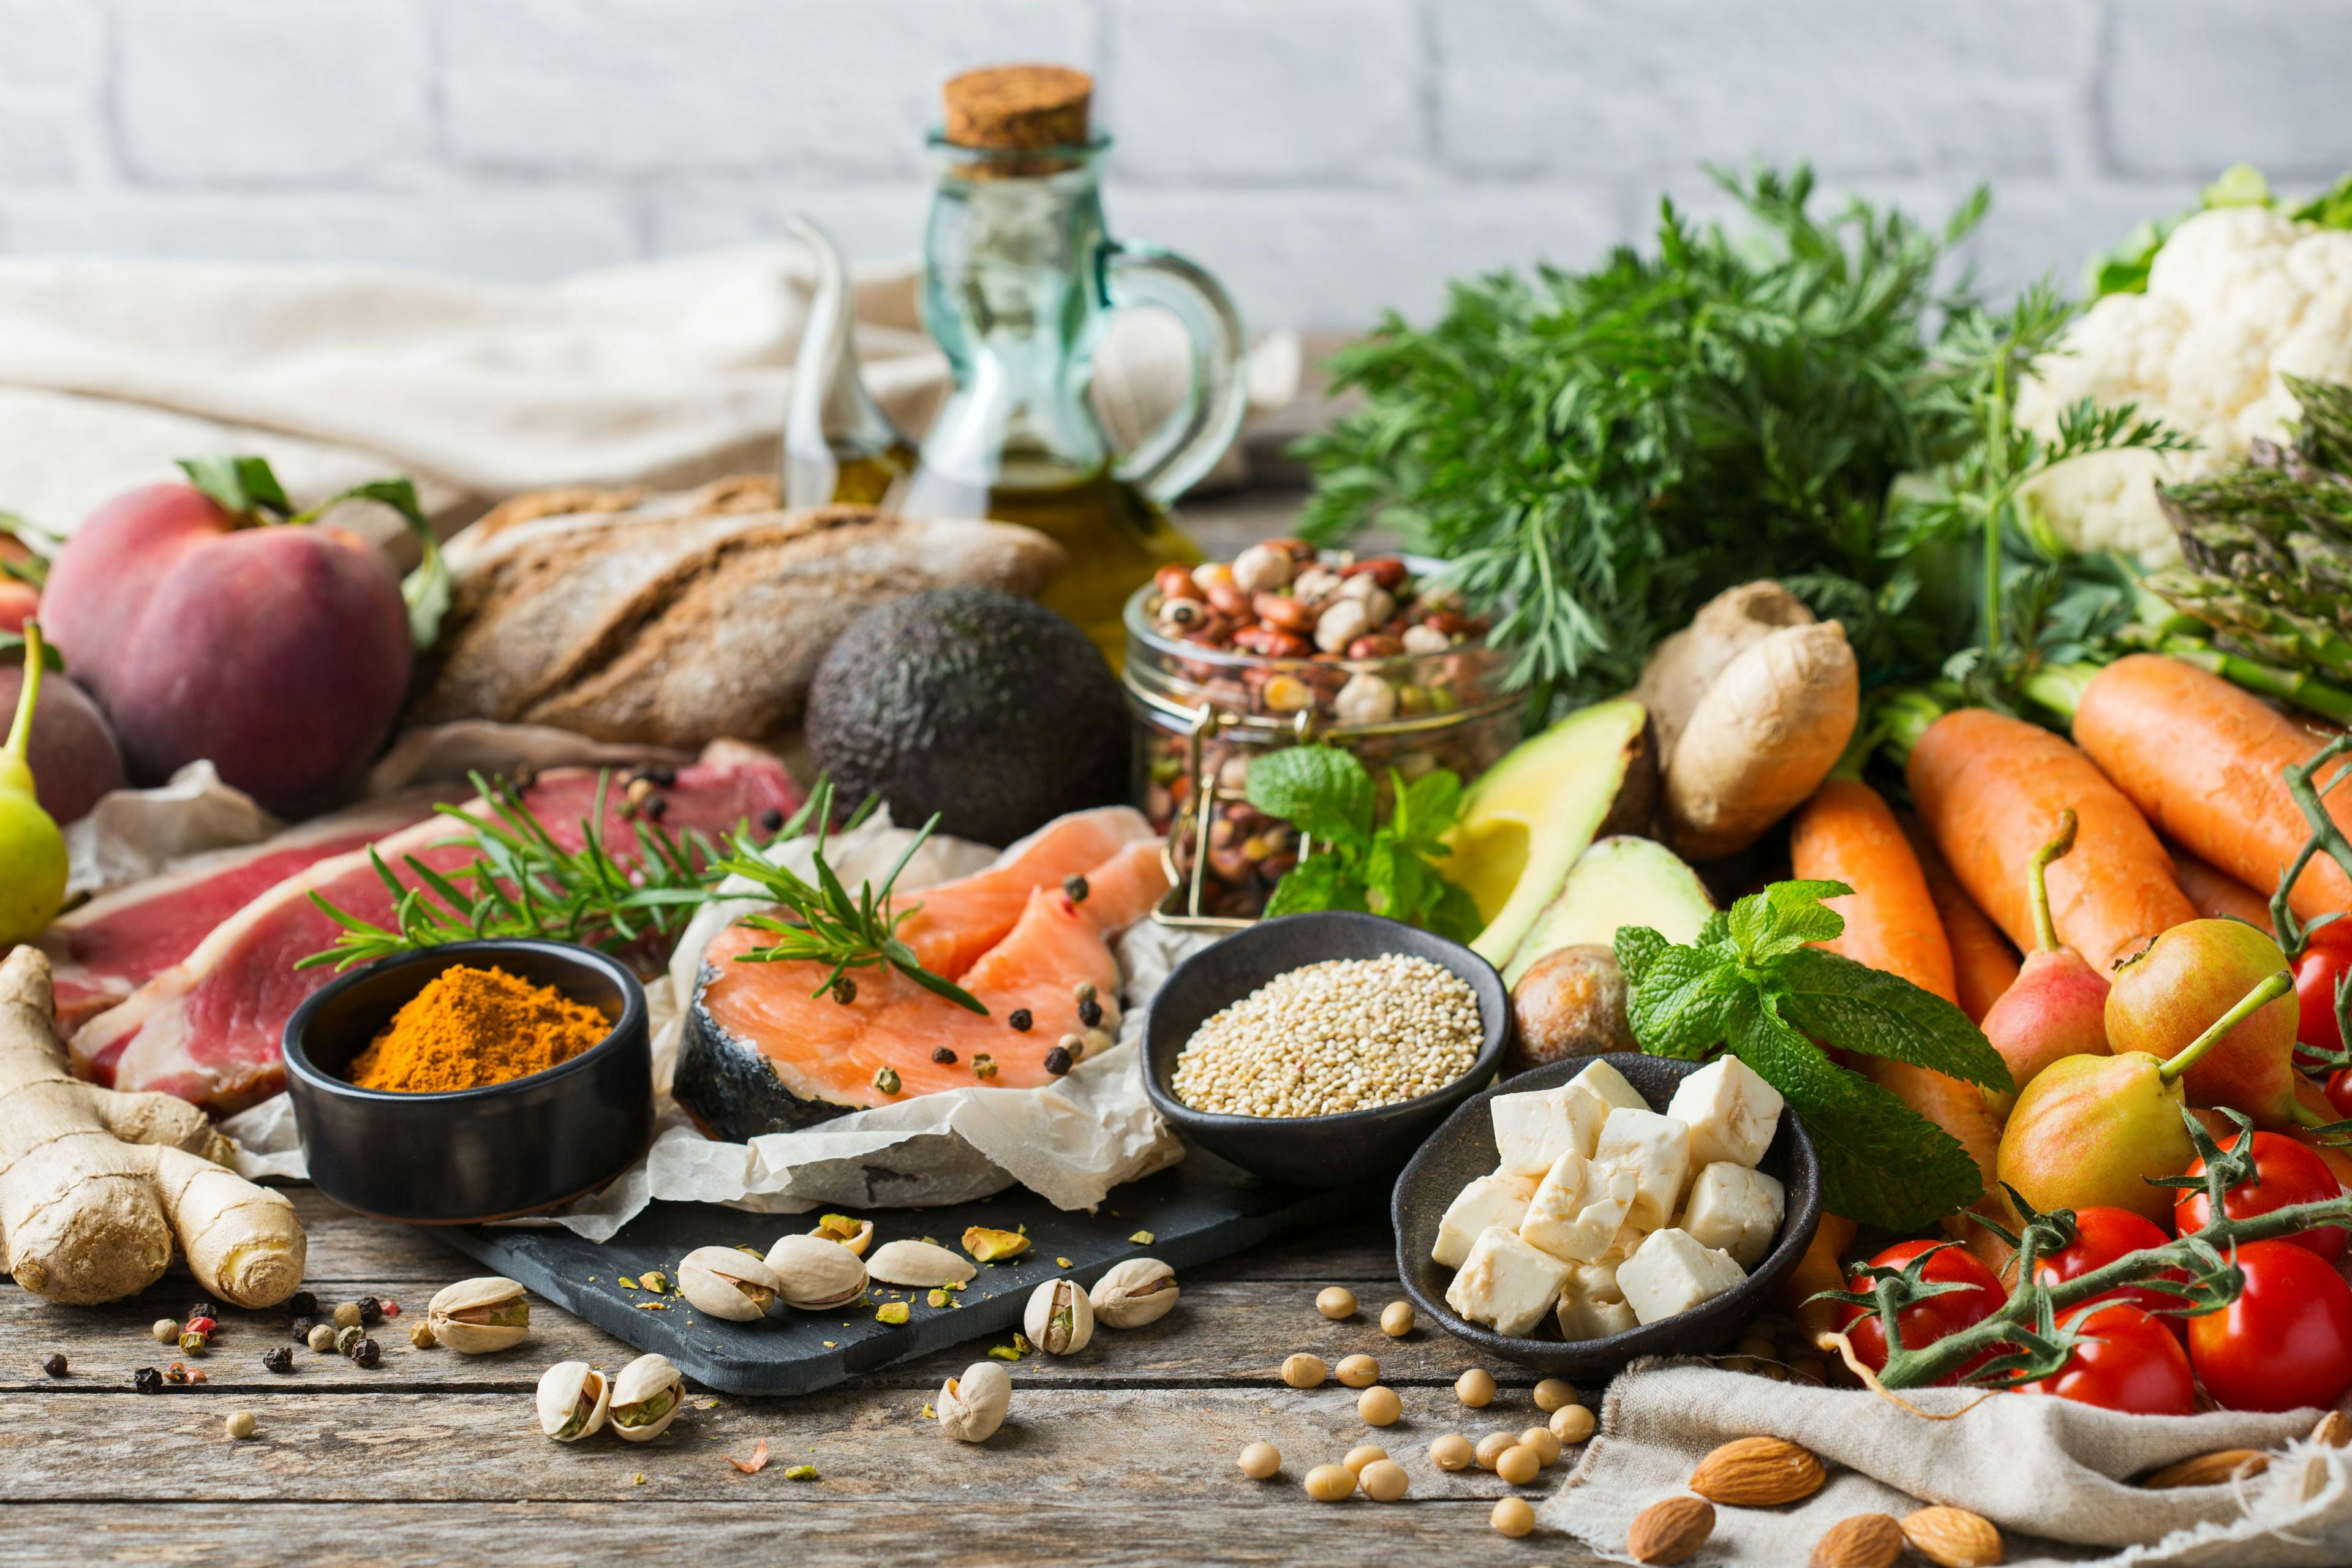 Moderate Carbohydrate Diet May Improve Glucose Control in Patients With T1D